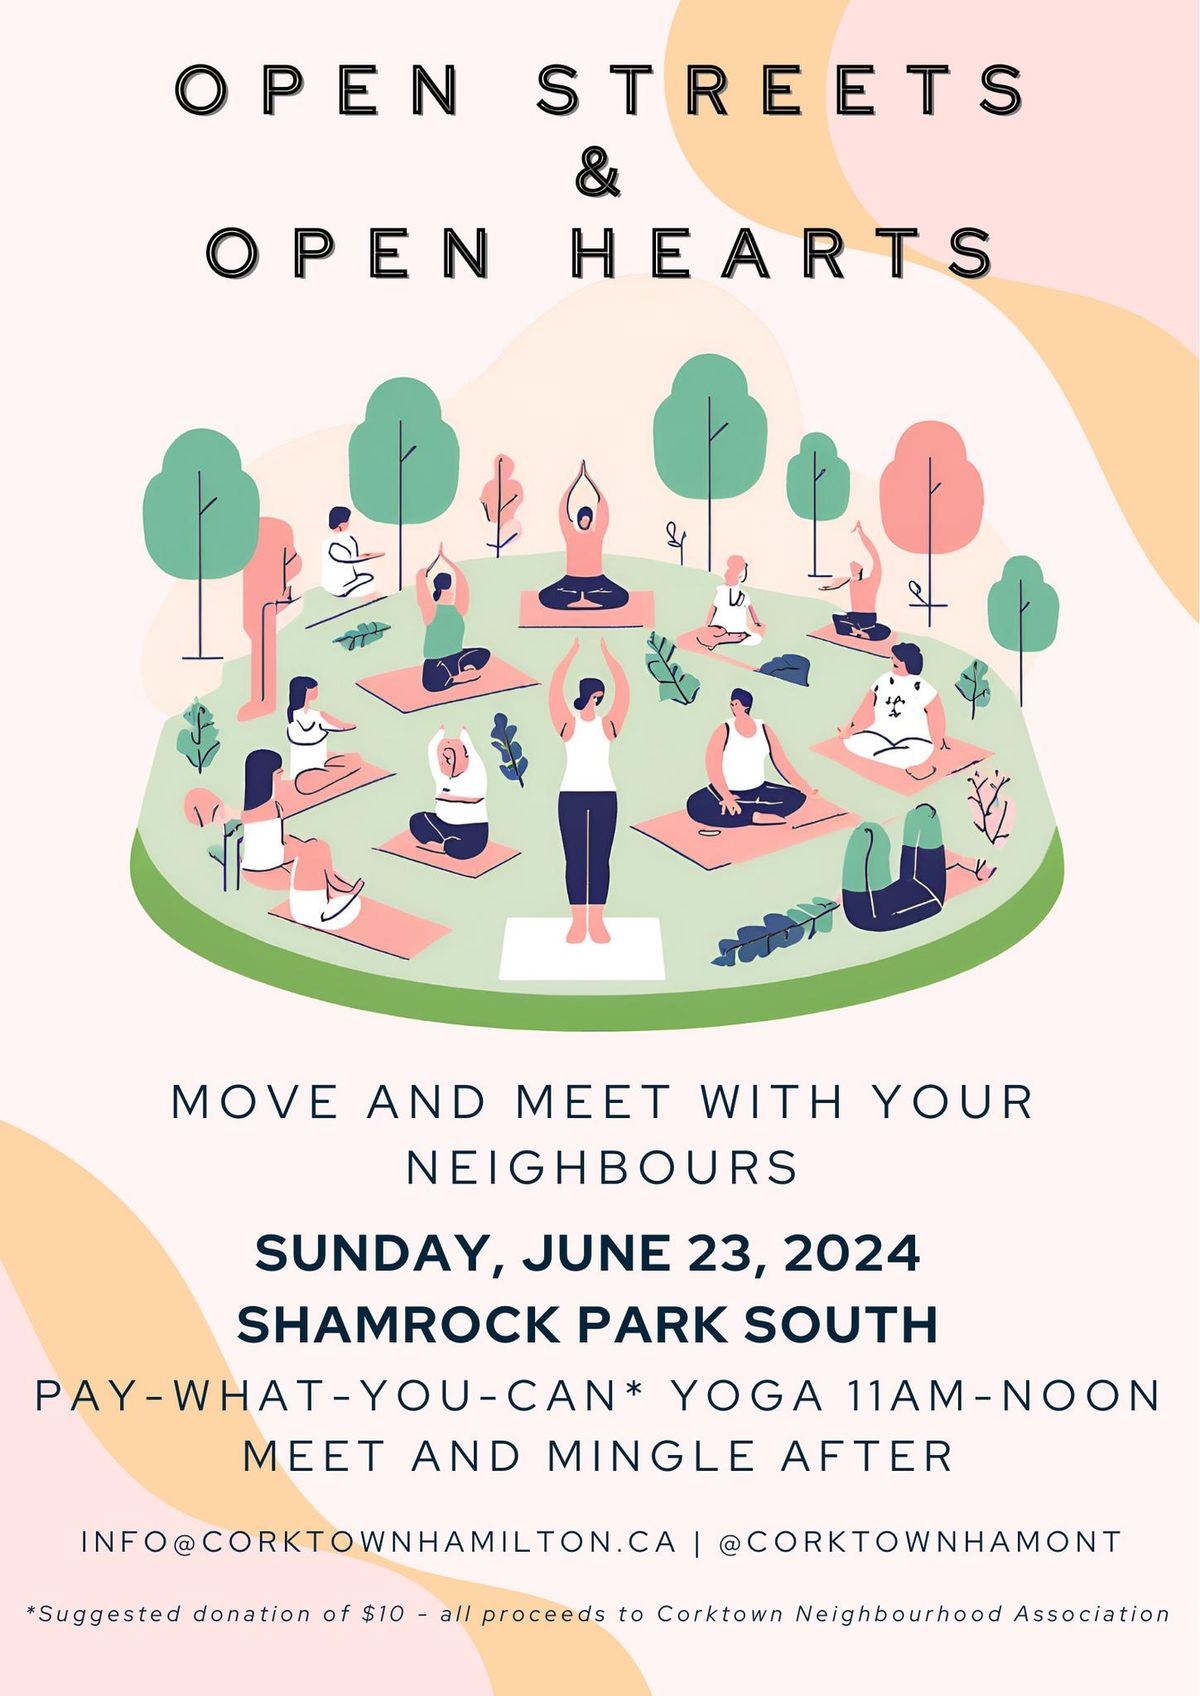 Open Streets & Open Hearts - Yoga in the Park